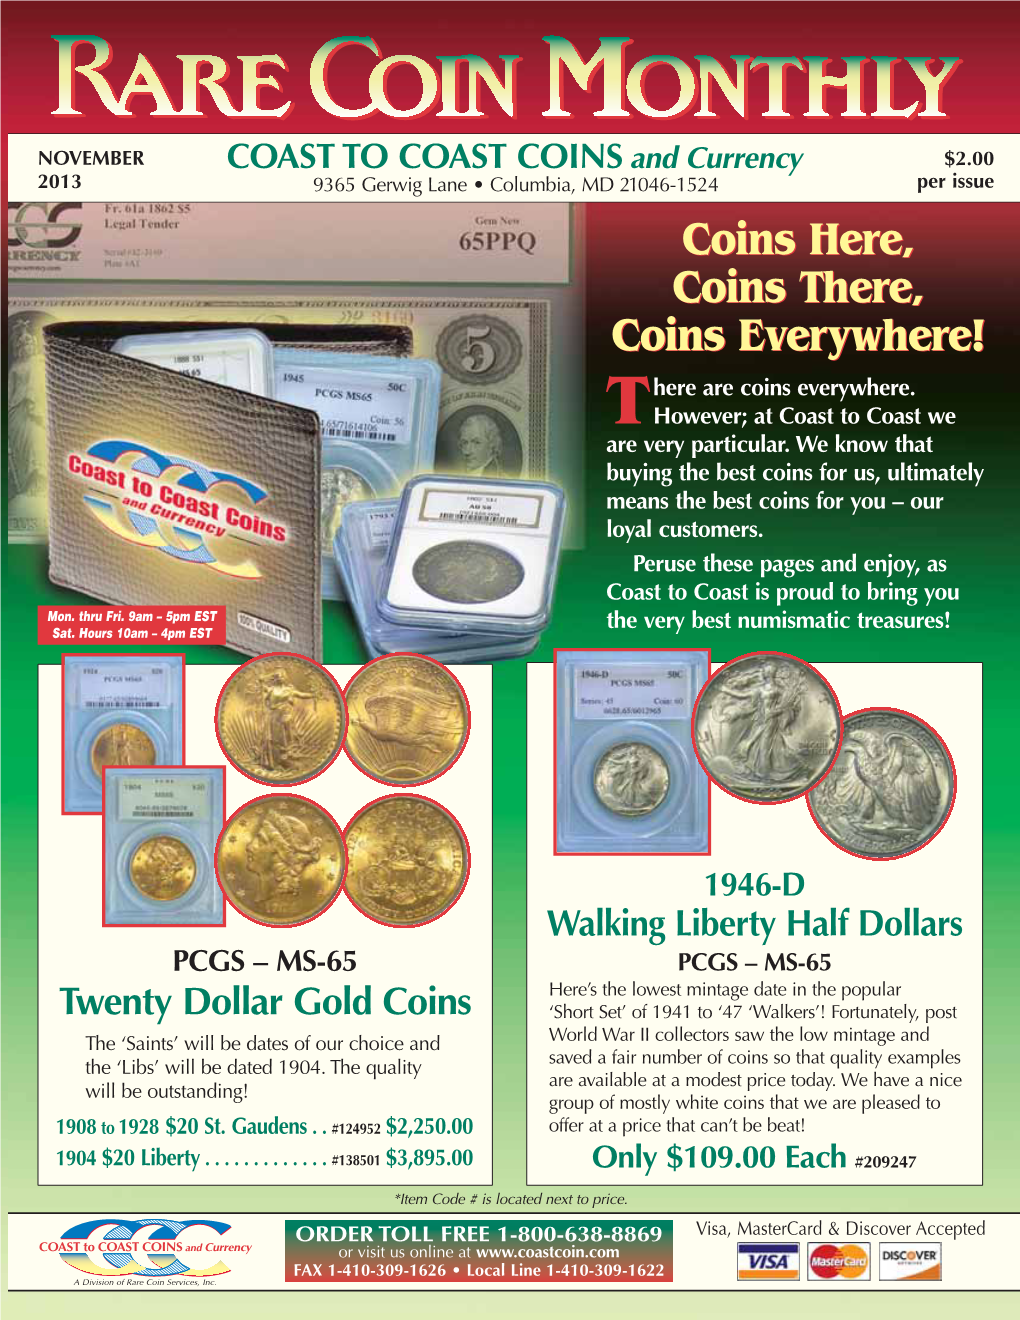 Coins Here, Coins There, Coins Everywhere! Here Are Coins Everywhere